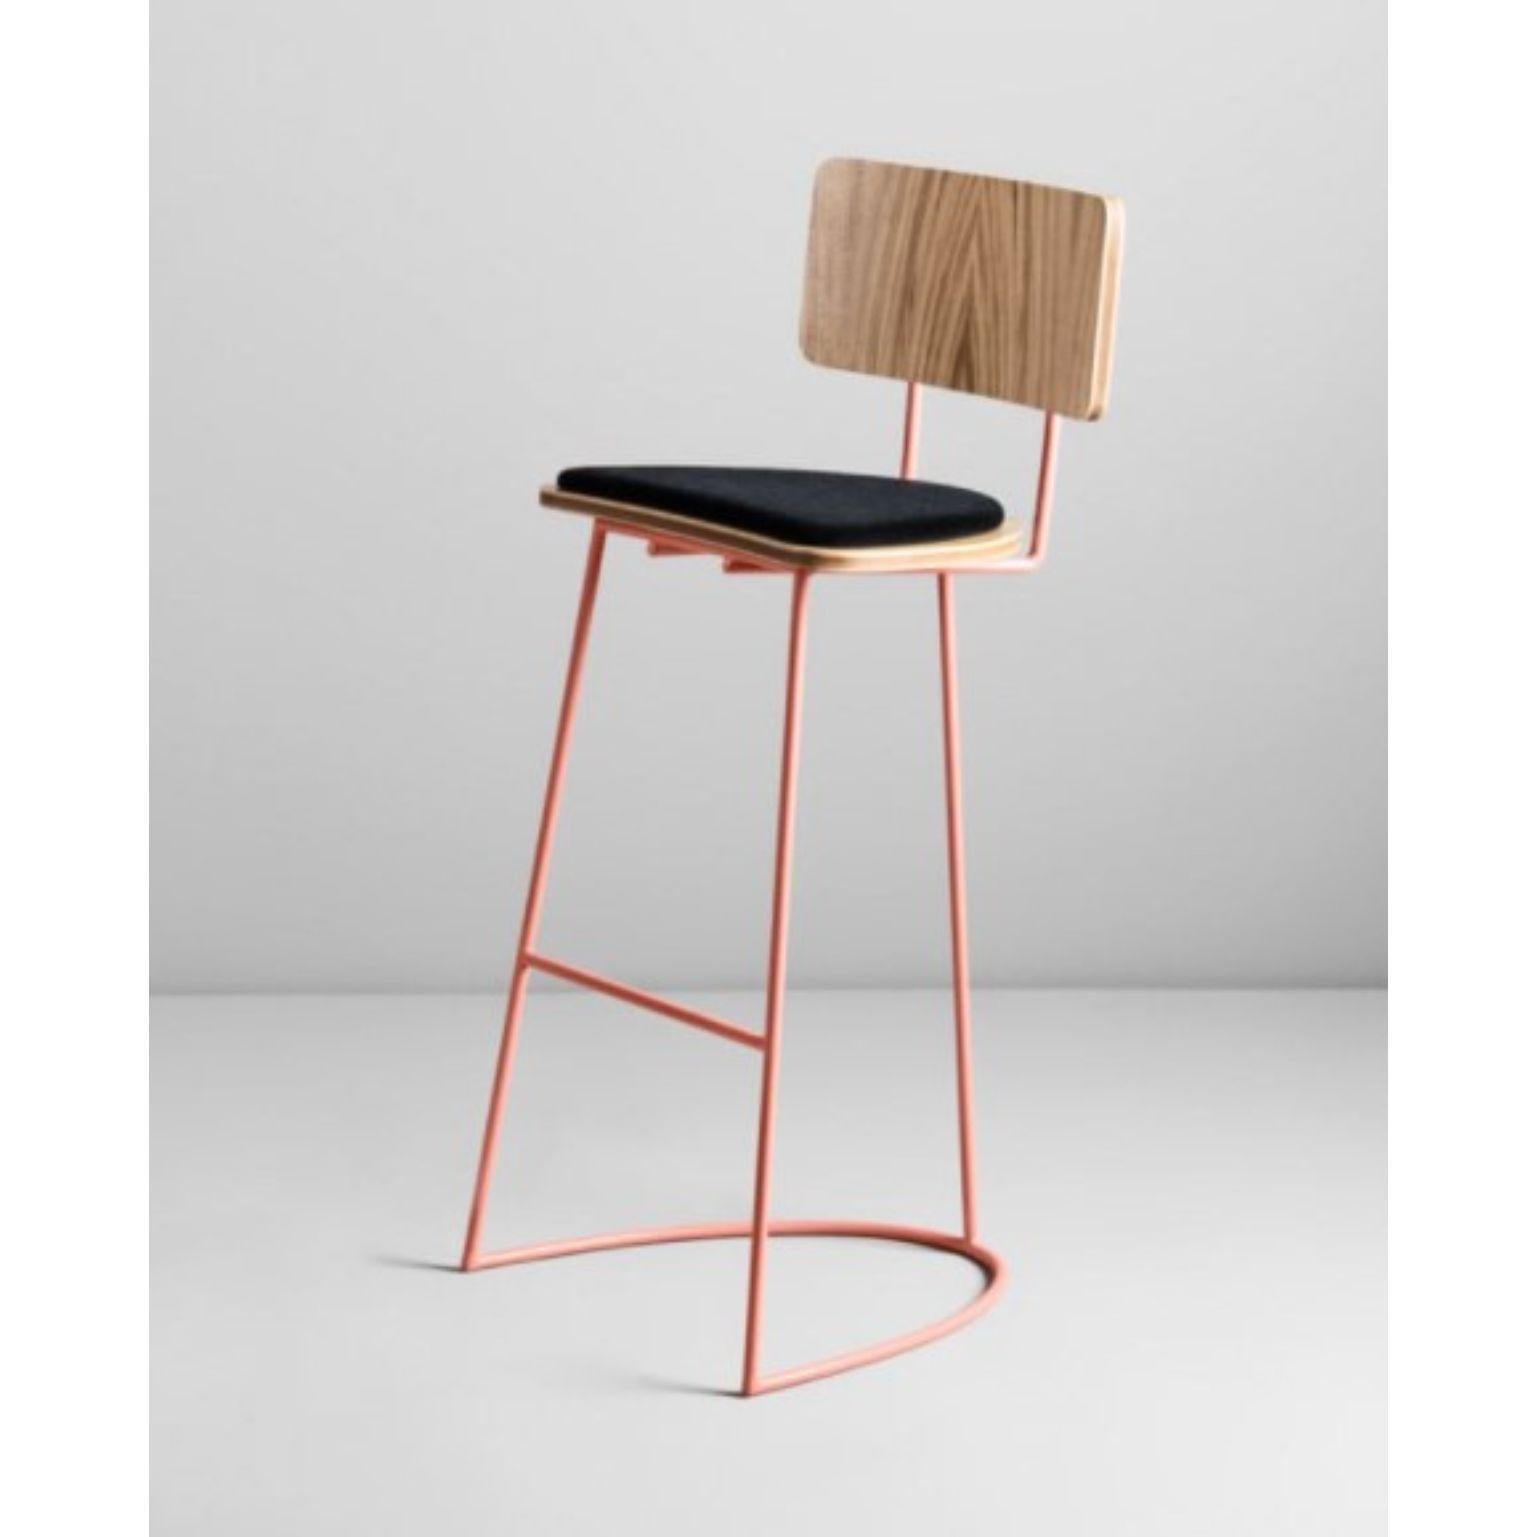 Boomerang stool with backrest & copper finishings by Pepe Albargues
Dimensions: W 47, D 48, H 108, Seat 79
Materials: Paint coated iron structure (copper /chromed / gold iron structure) 
Plywood backrest and seat covered with a natural oak wood